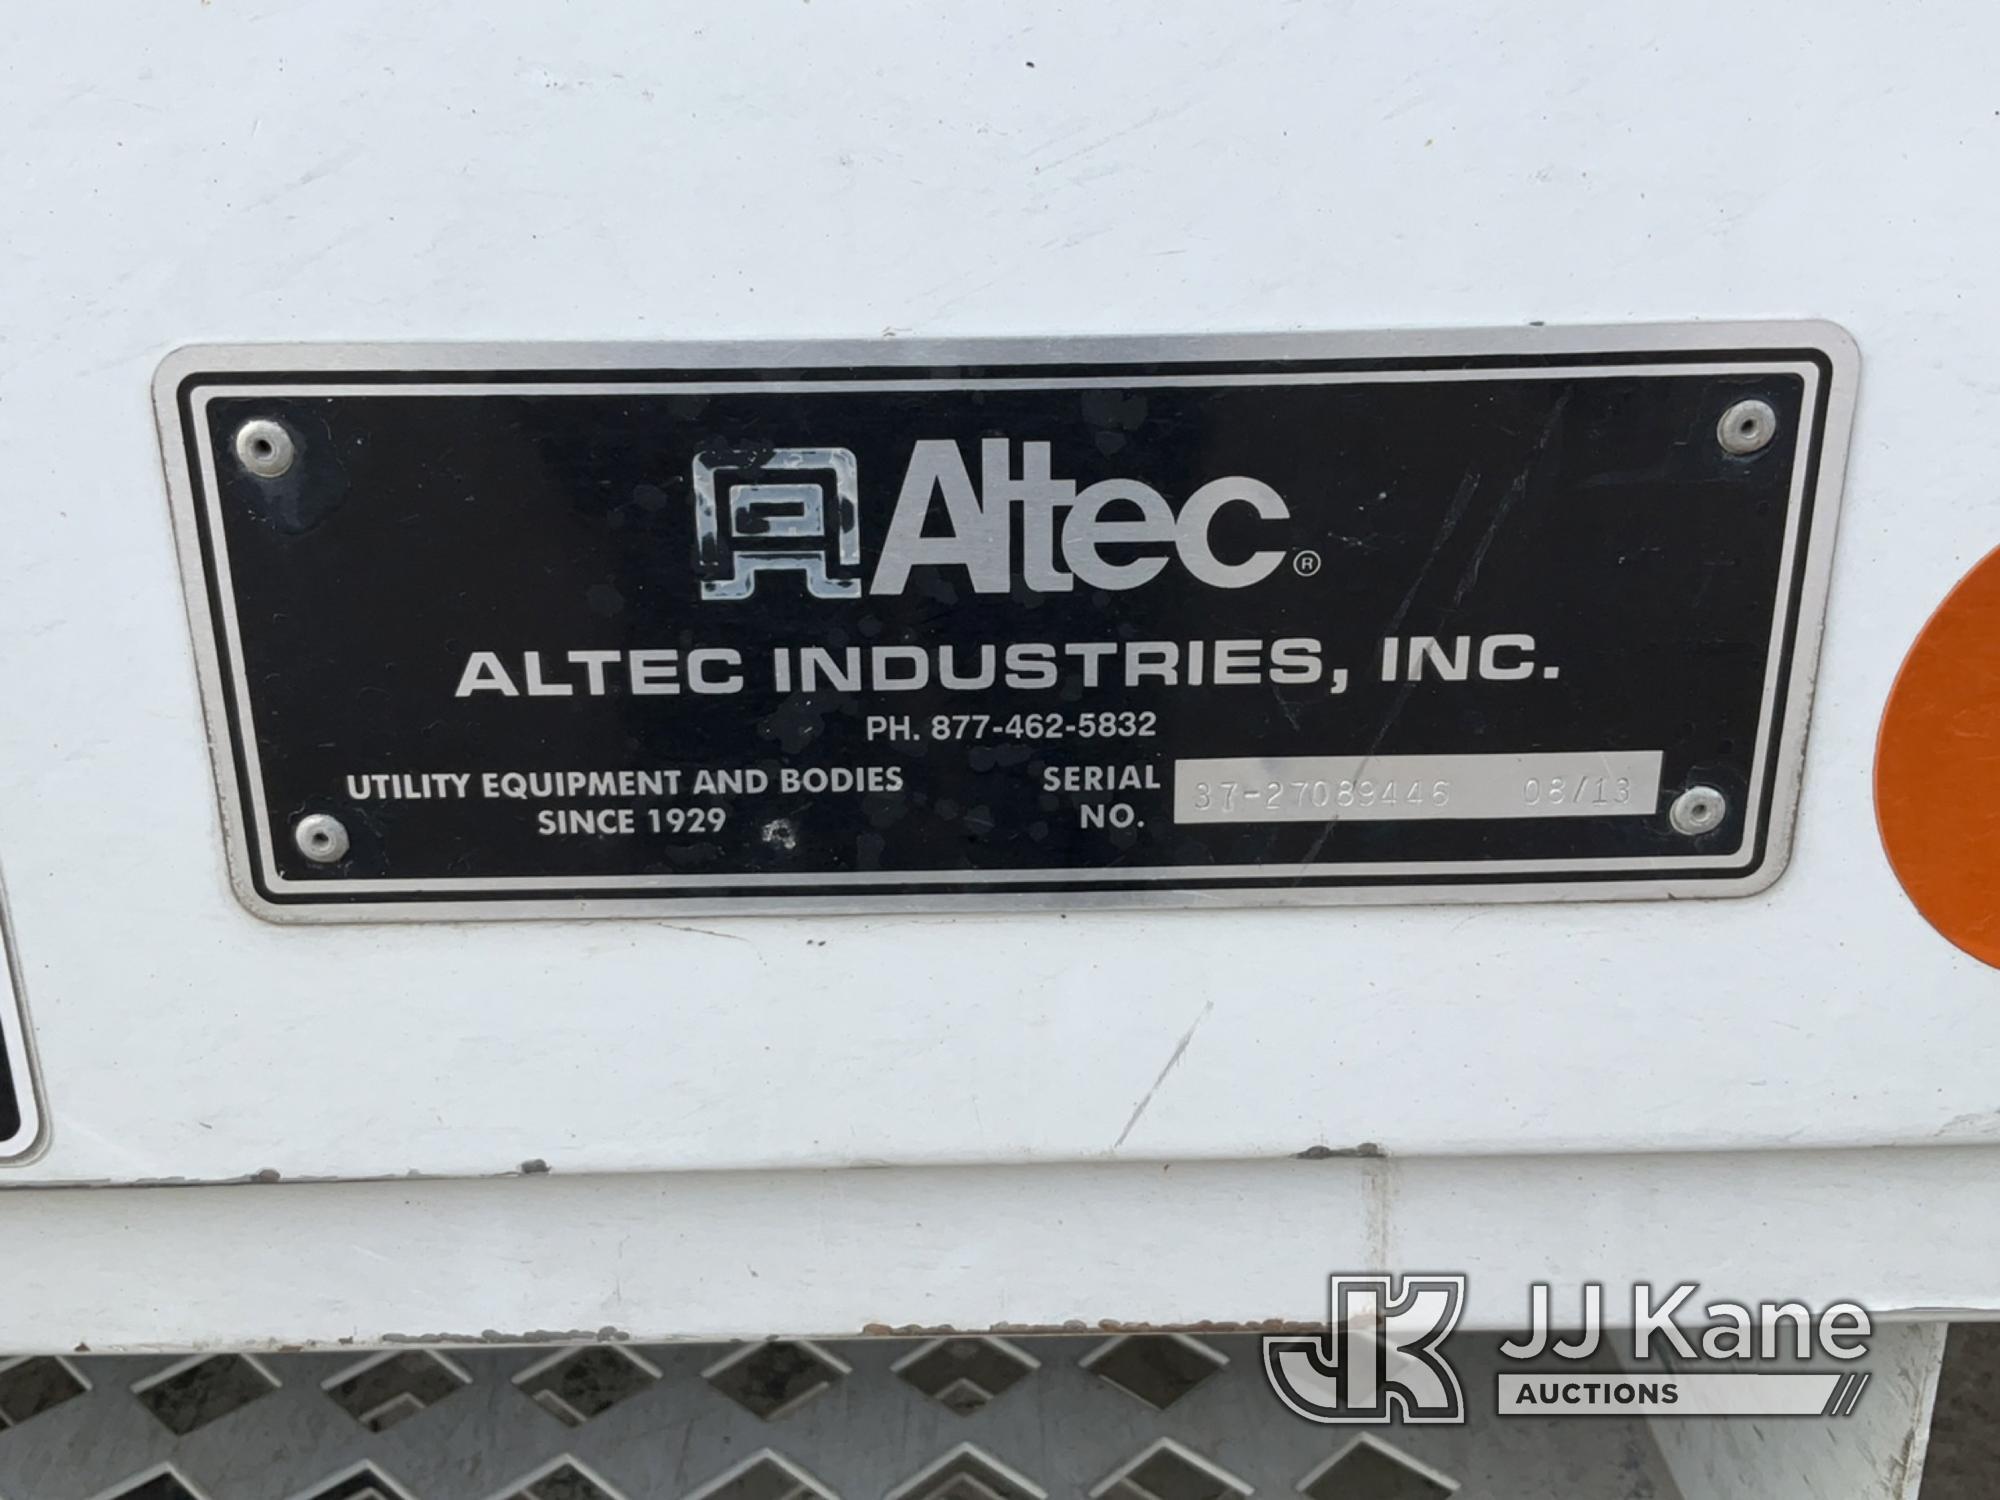 (Des Moines, IA) Altec AM55E, Over-Center Material Handling Bucket Truck rear mounted on 2014 Freigh